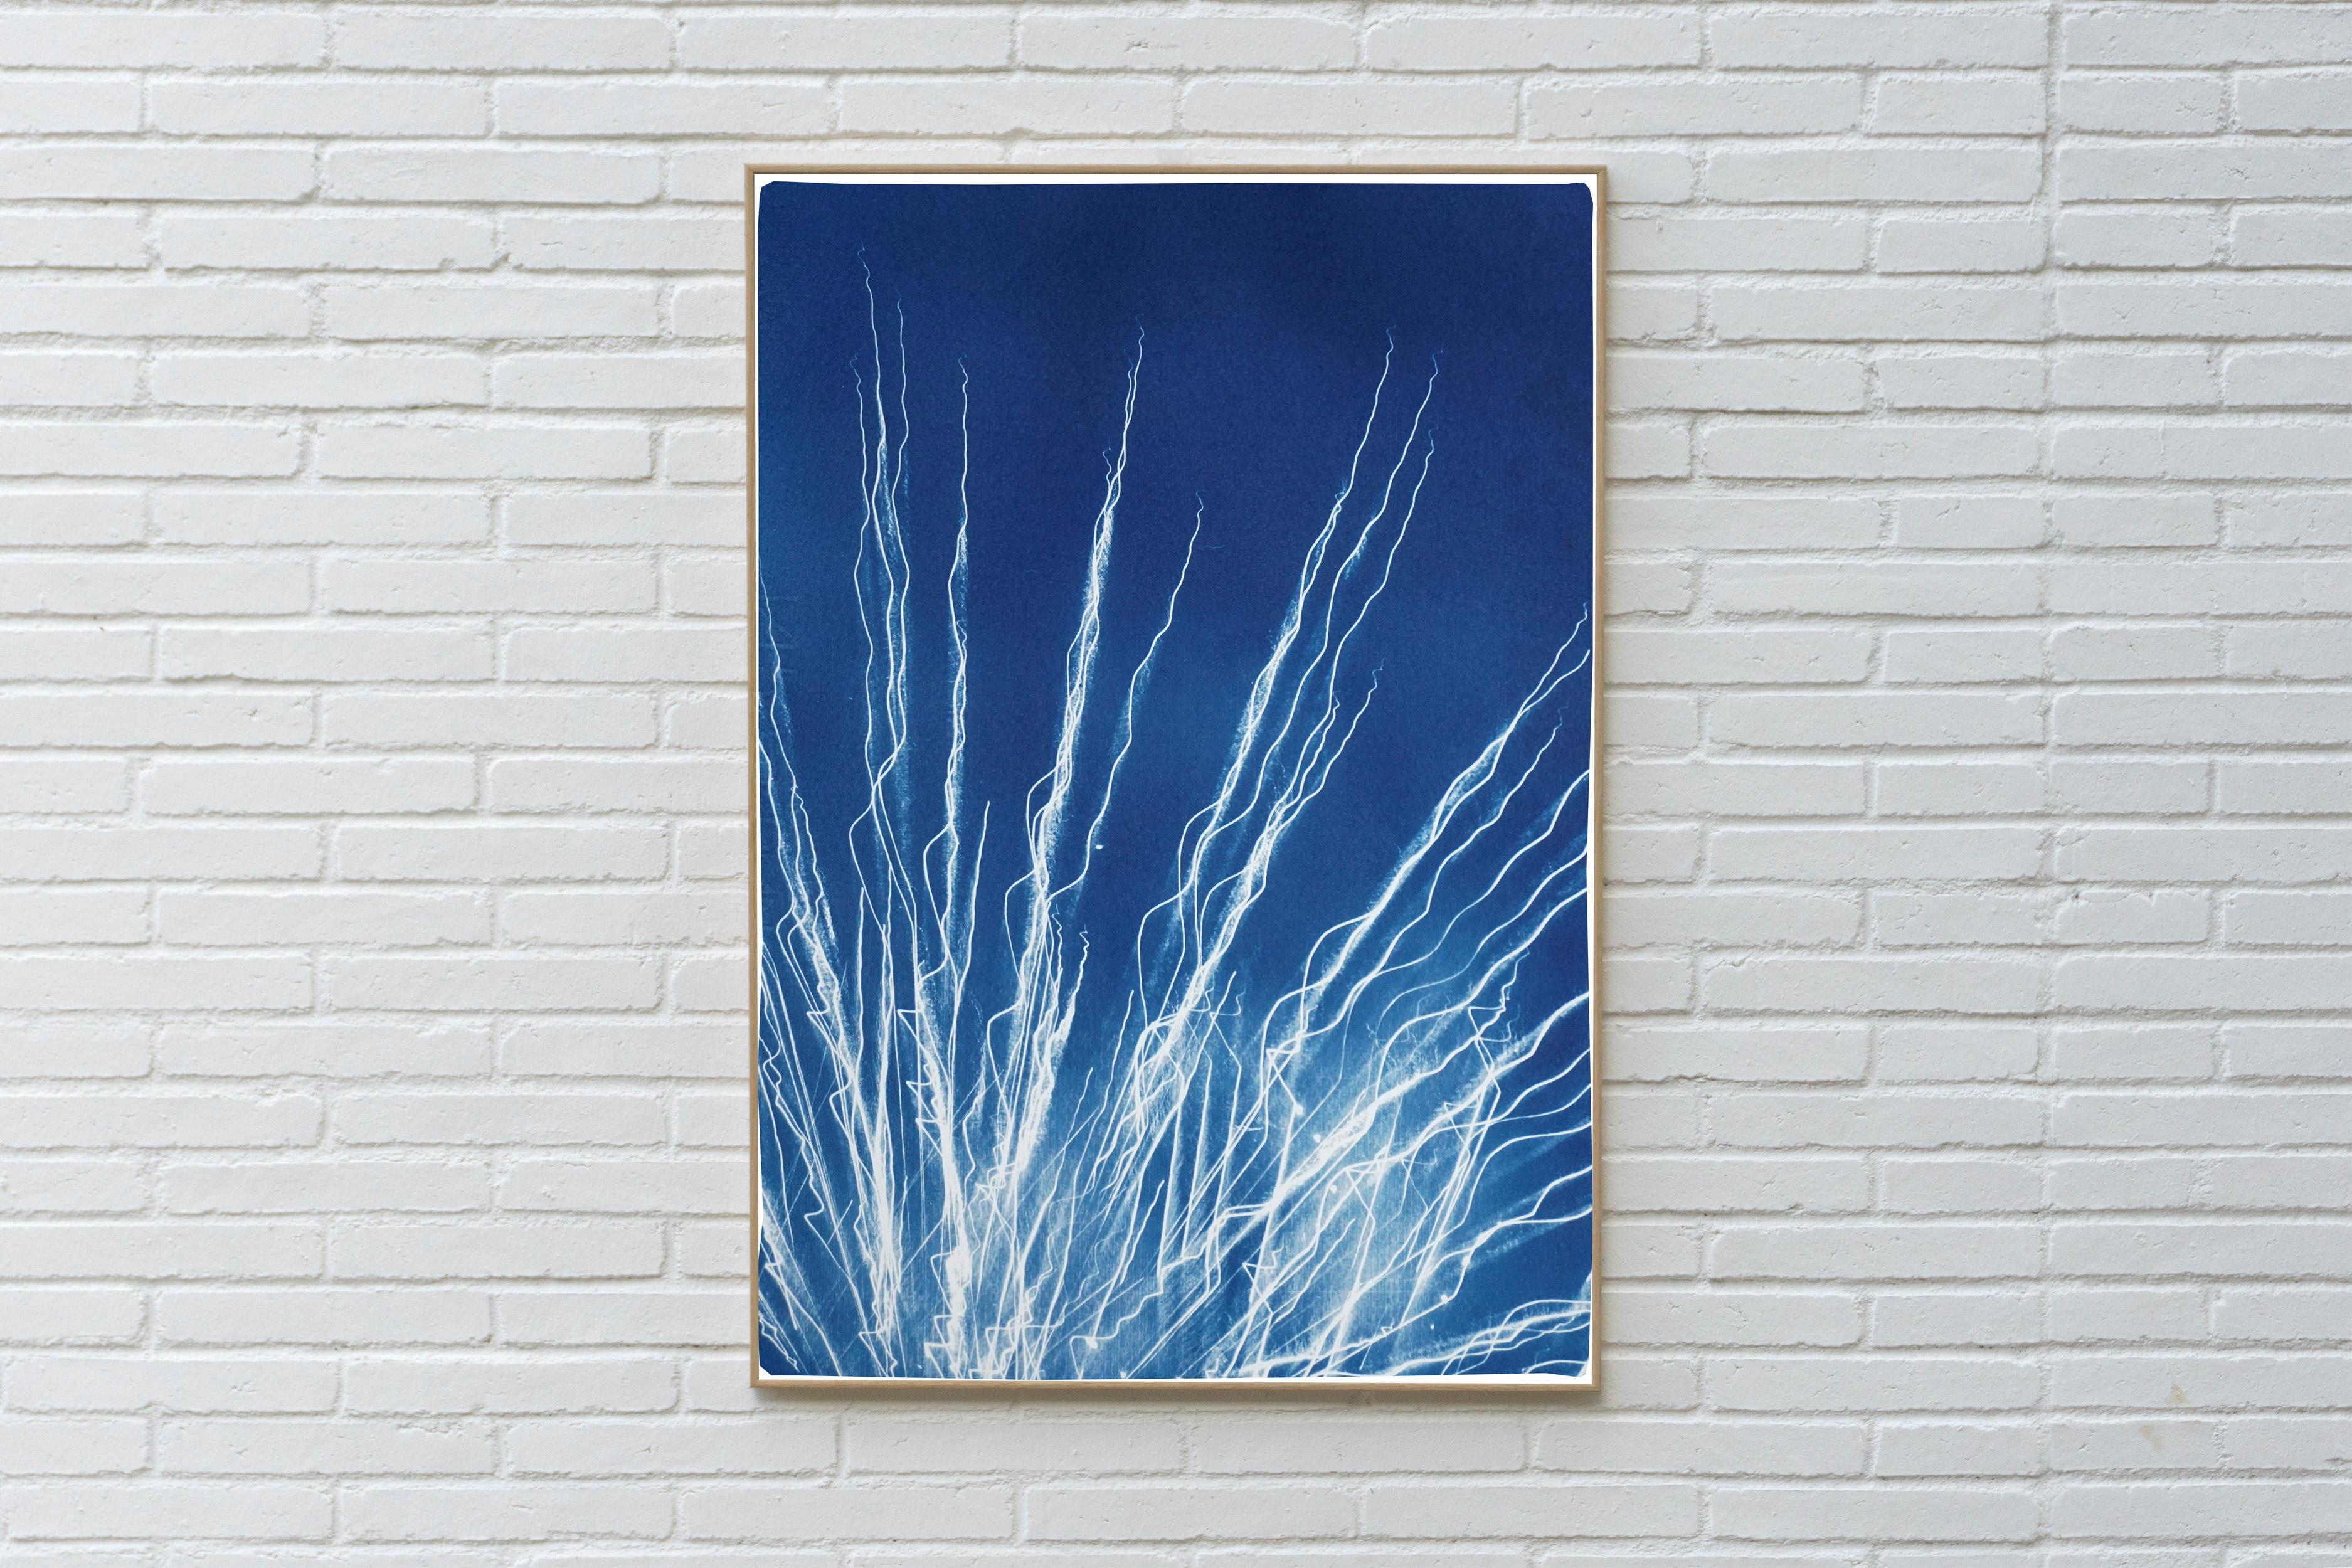 Glowing Fireworks Lights, Blue and White Contemporary Cyanotype on Paper, 2020 - Painting by Kind of Cyan